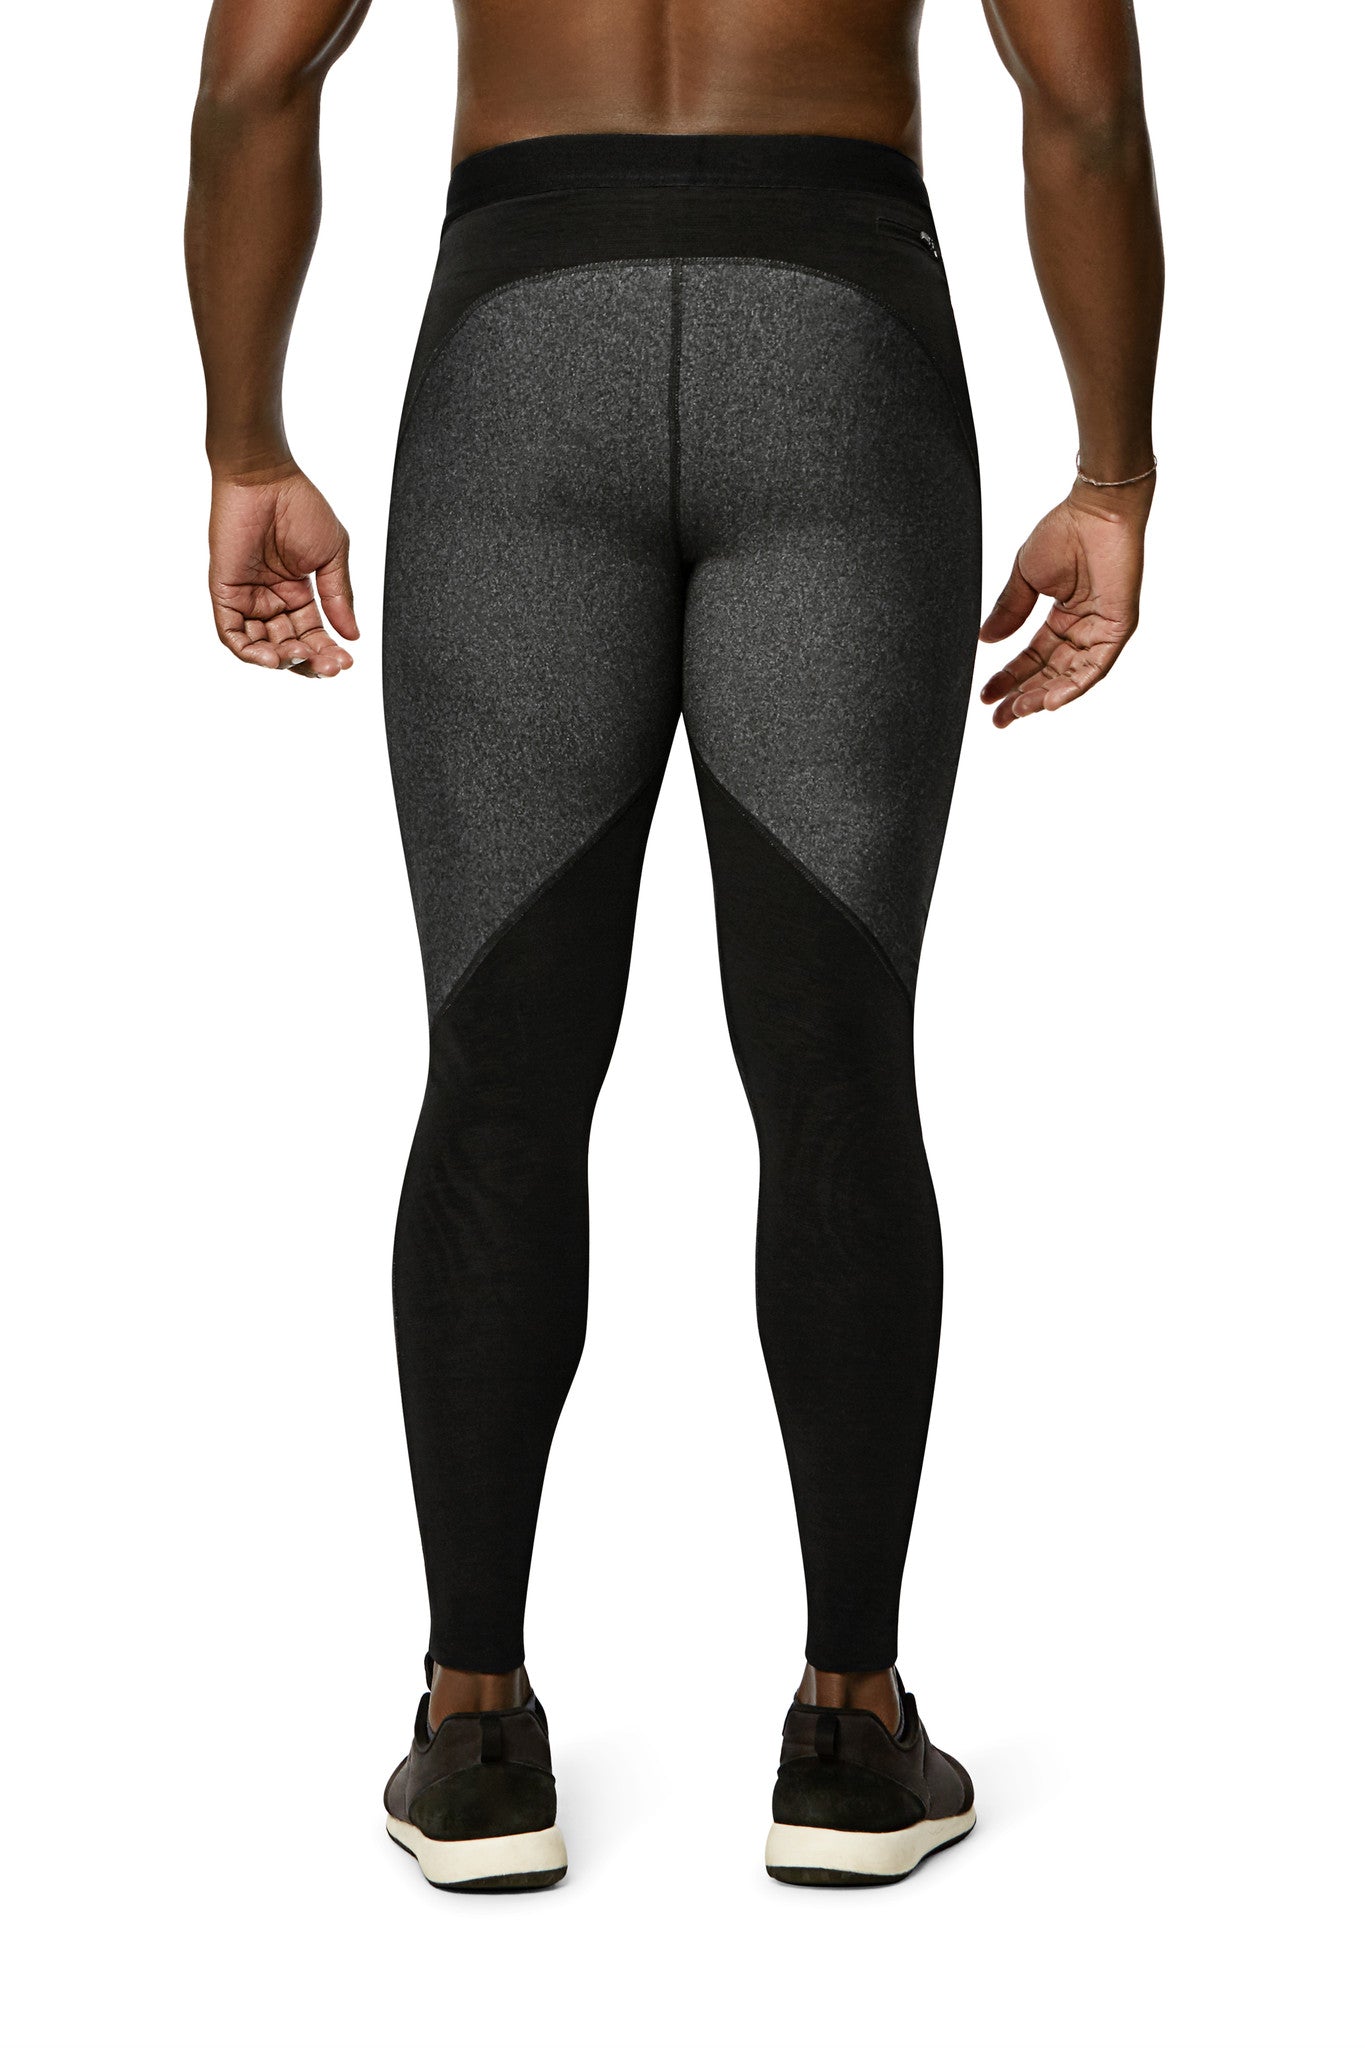 Men's Long Weighted Compression Workout Tights | KILOGEAR